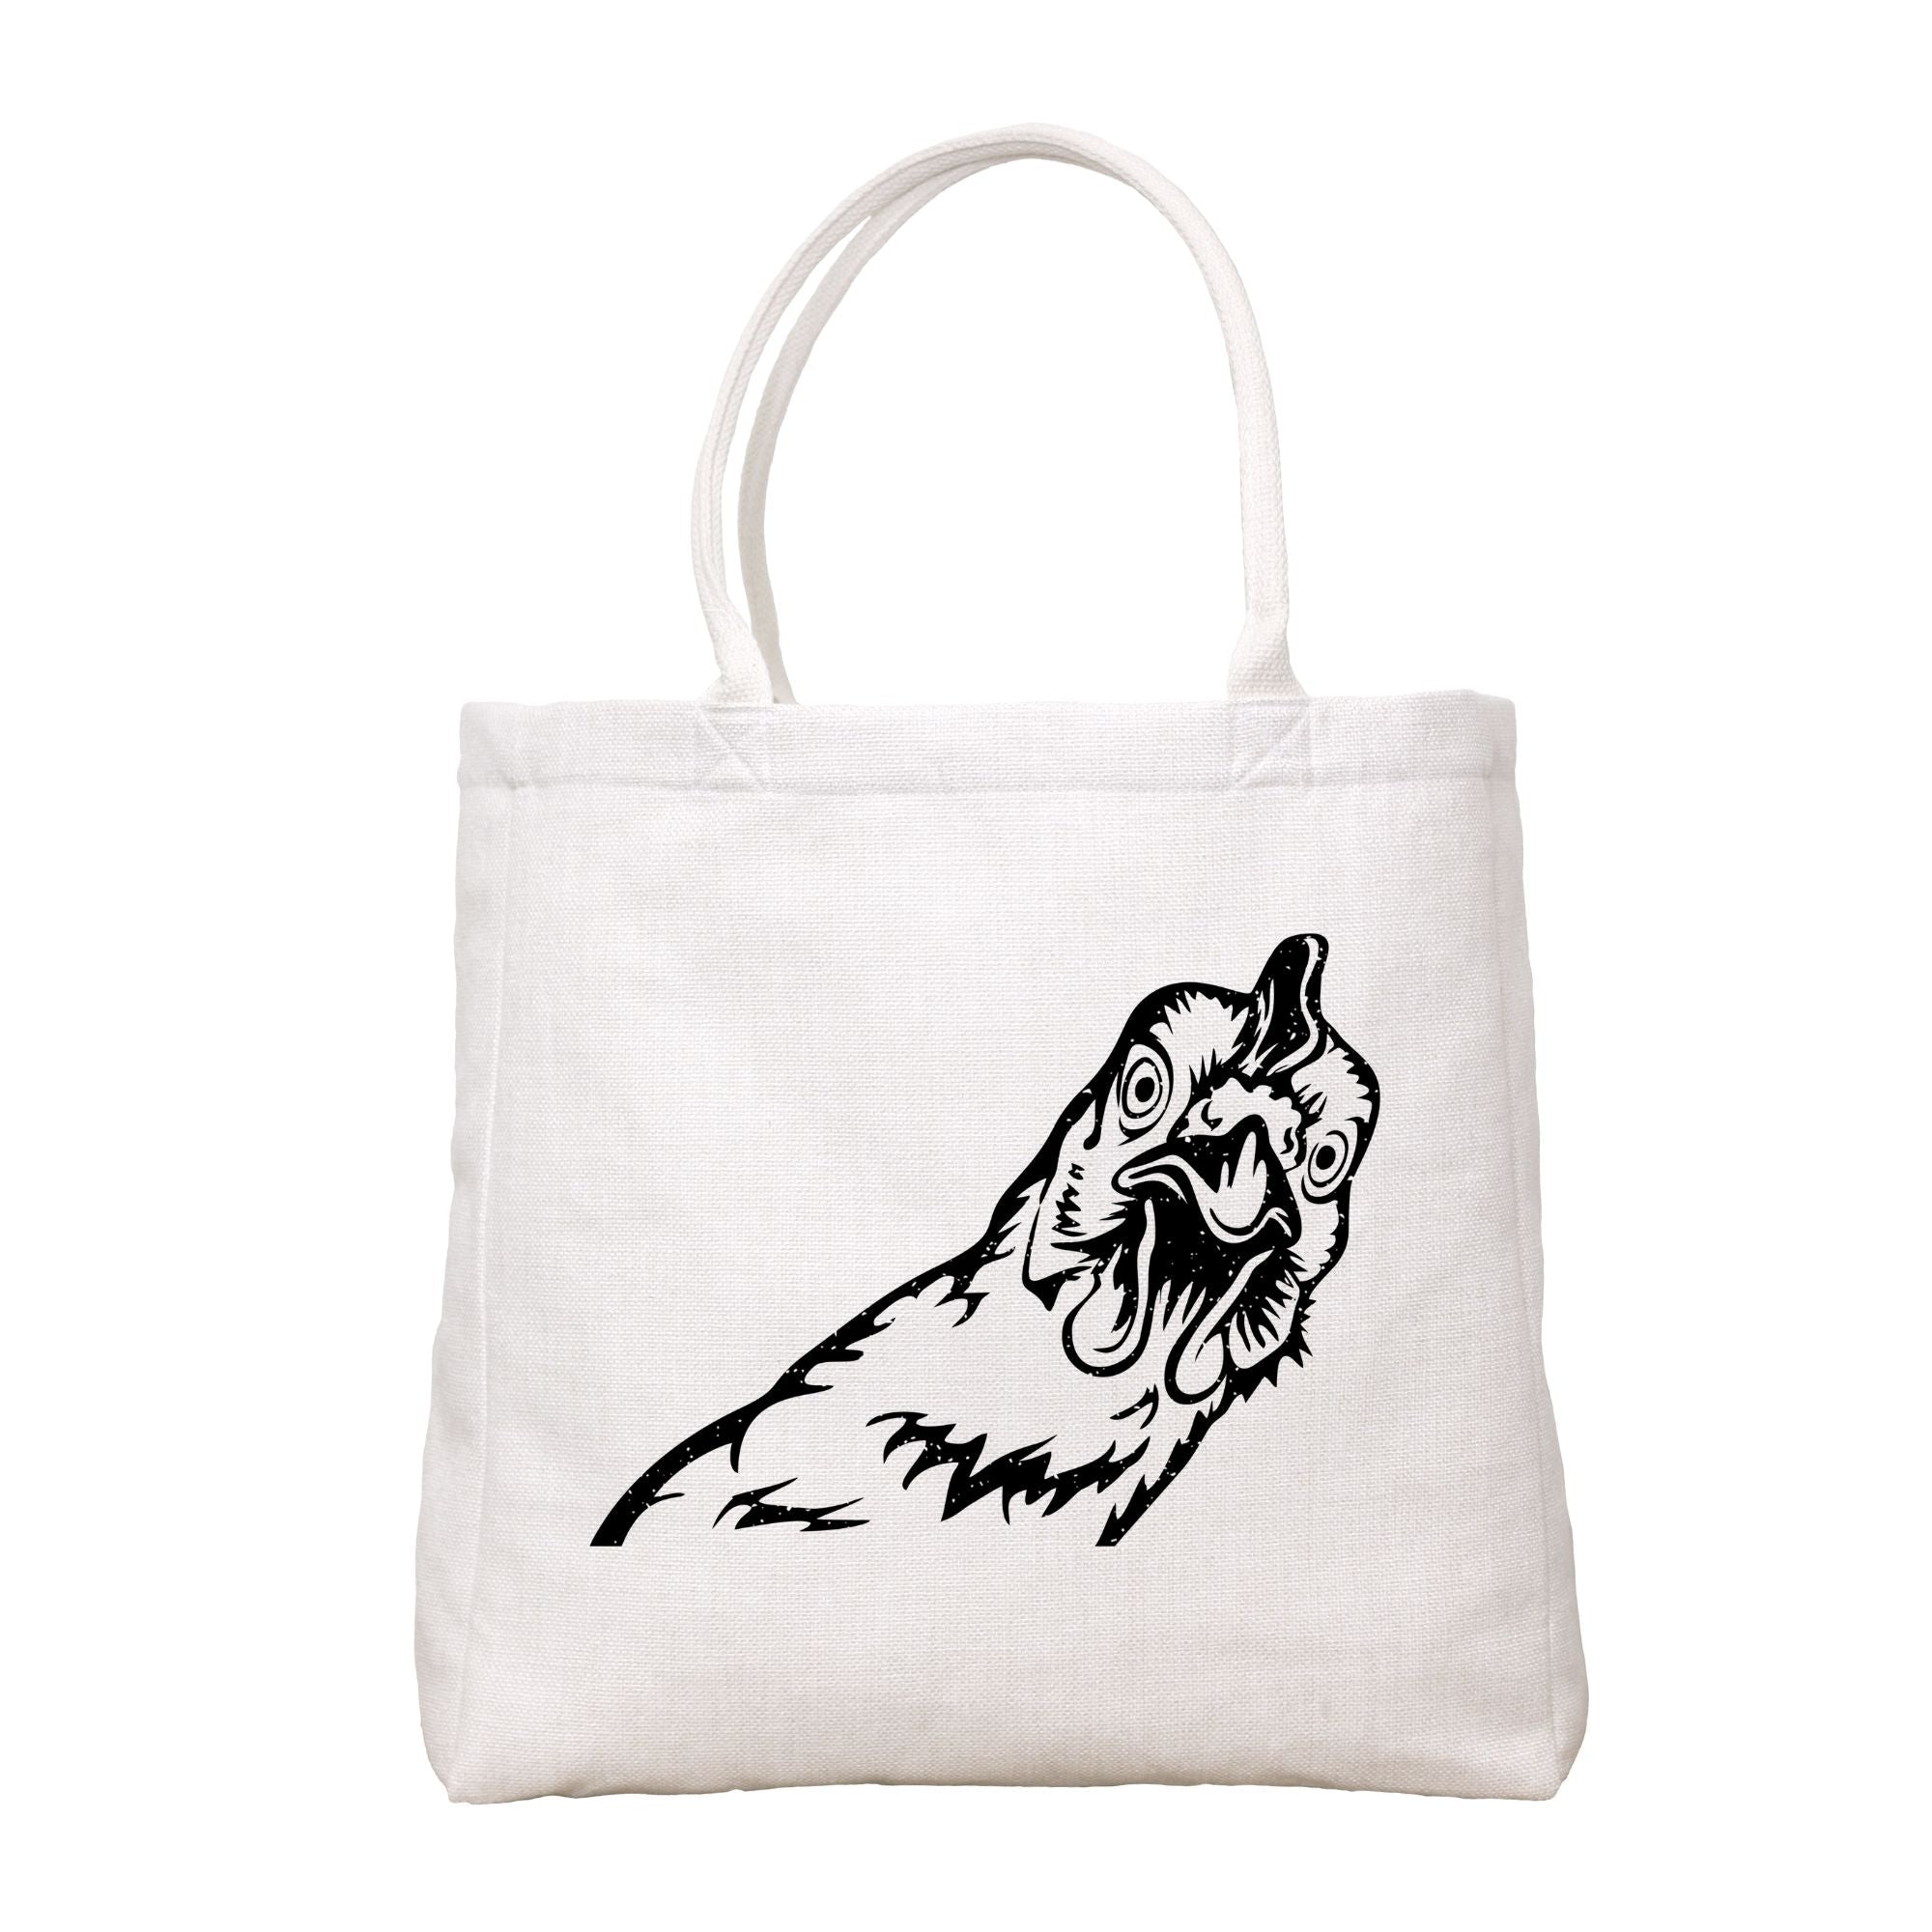 Curious Chicken Tote Bag